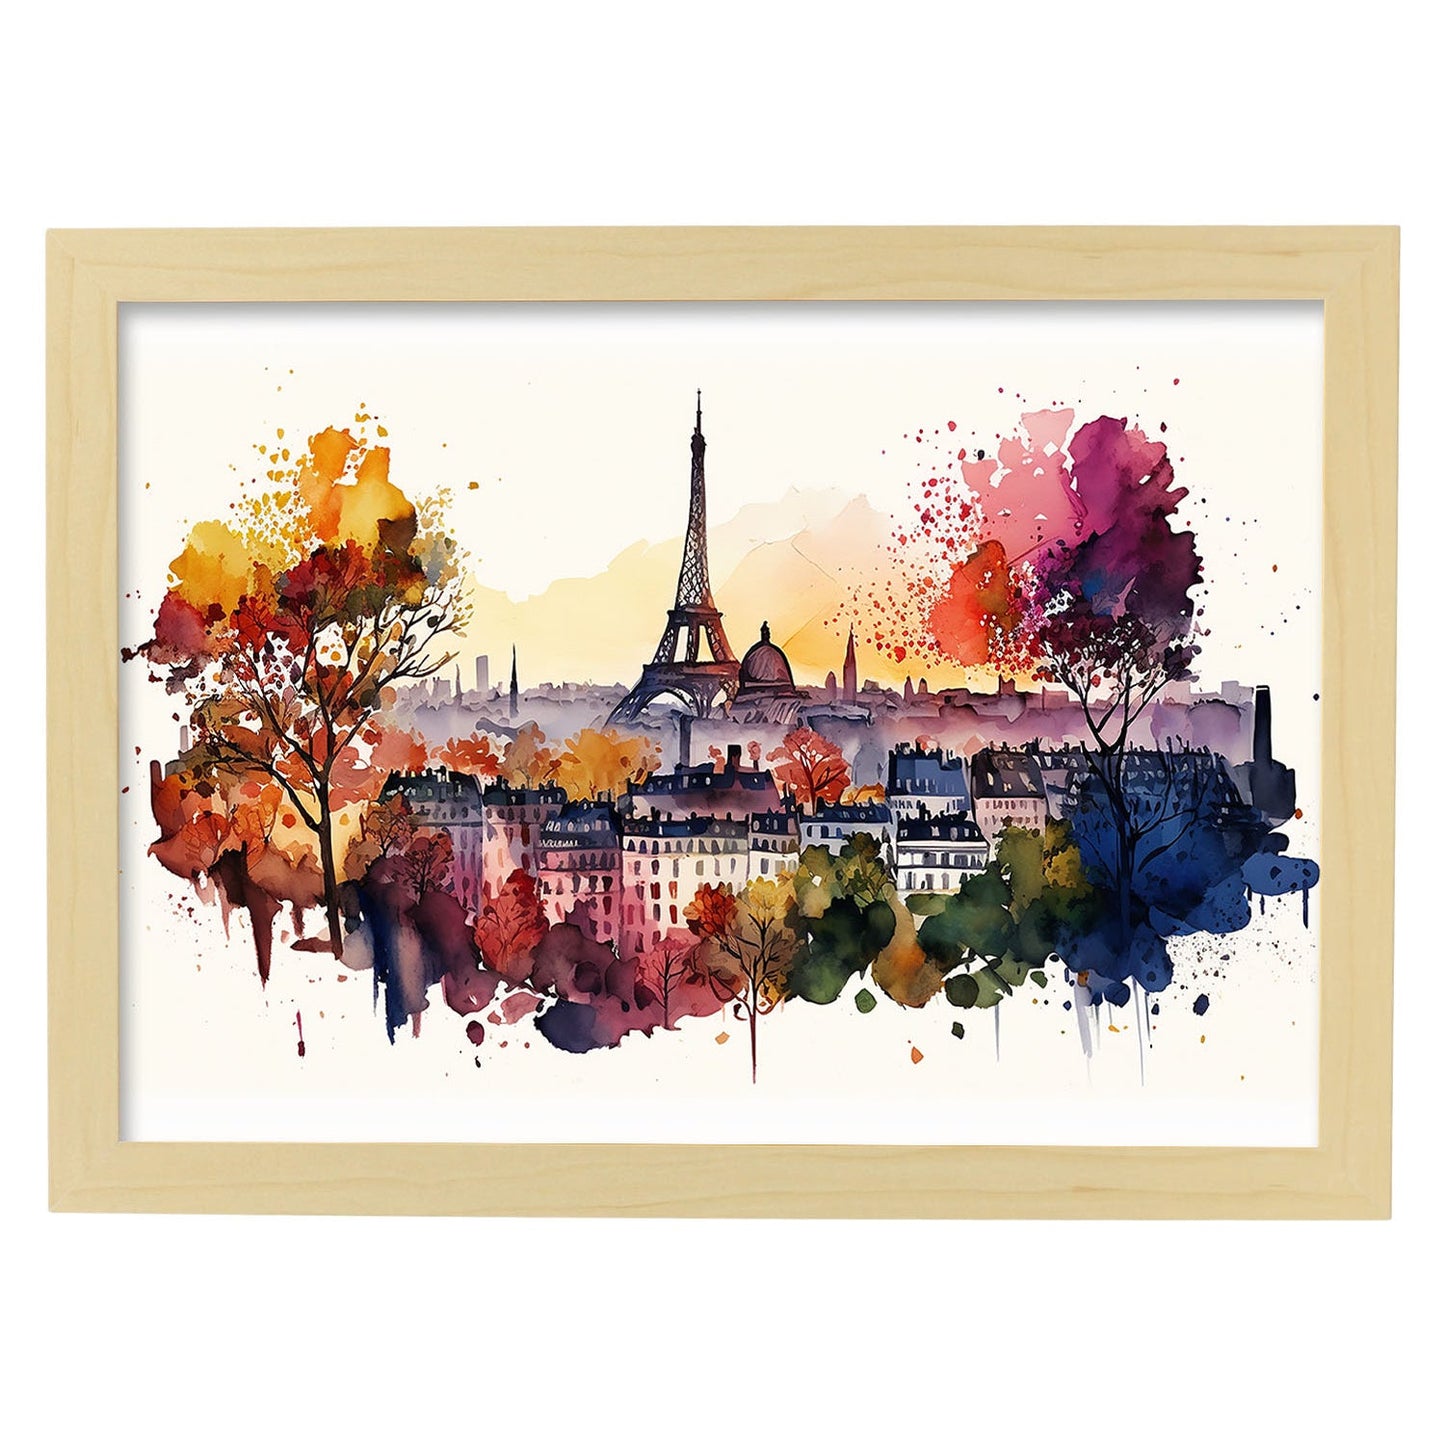 Nacnic watercolor of a skyline of the city of paris. Aesthetic Wall Art Prints for Bedroom or Living Room Design.-Artwork-Nacnic-A4-Marco Madera Clara-Nacnic Estudio SL